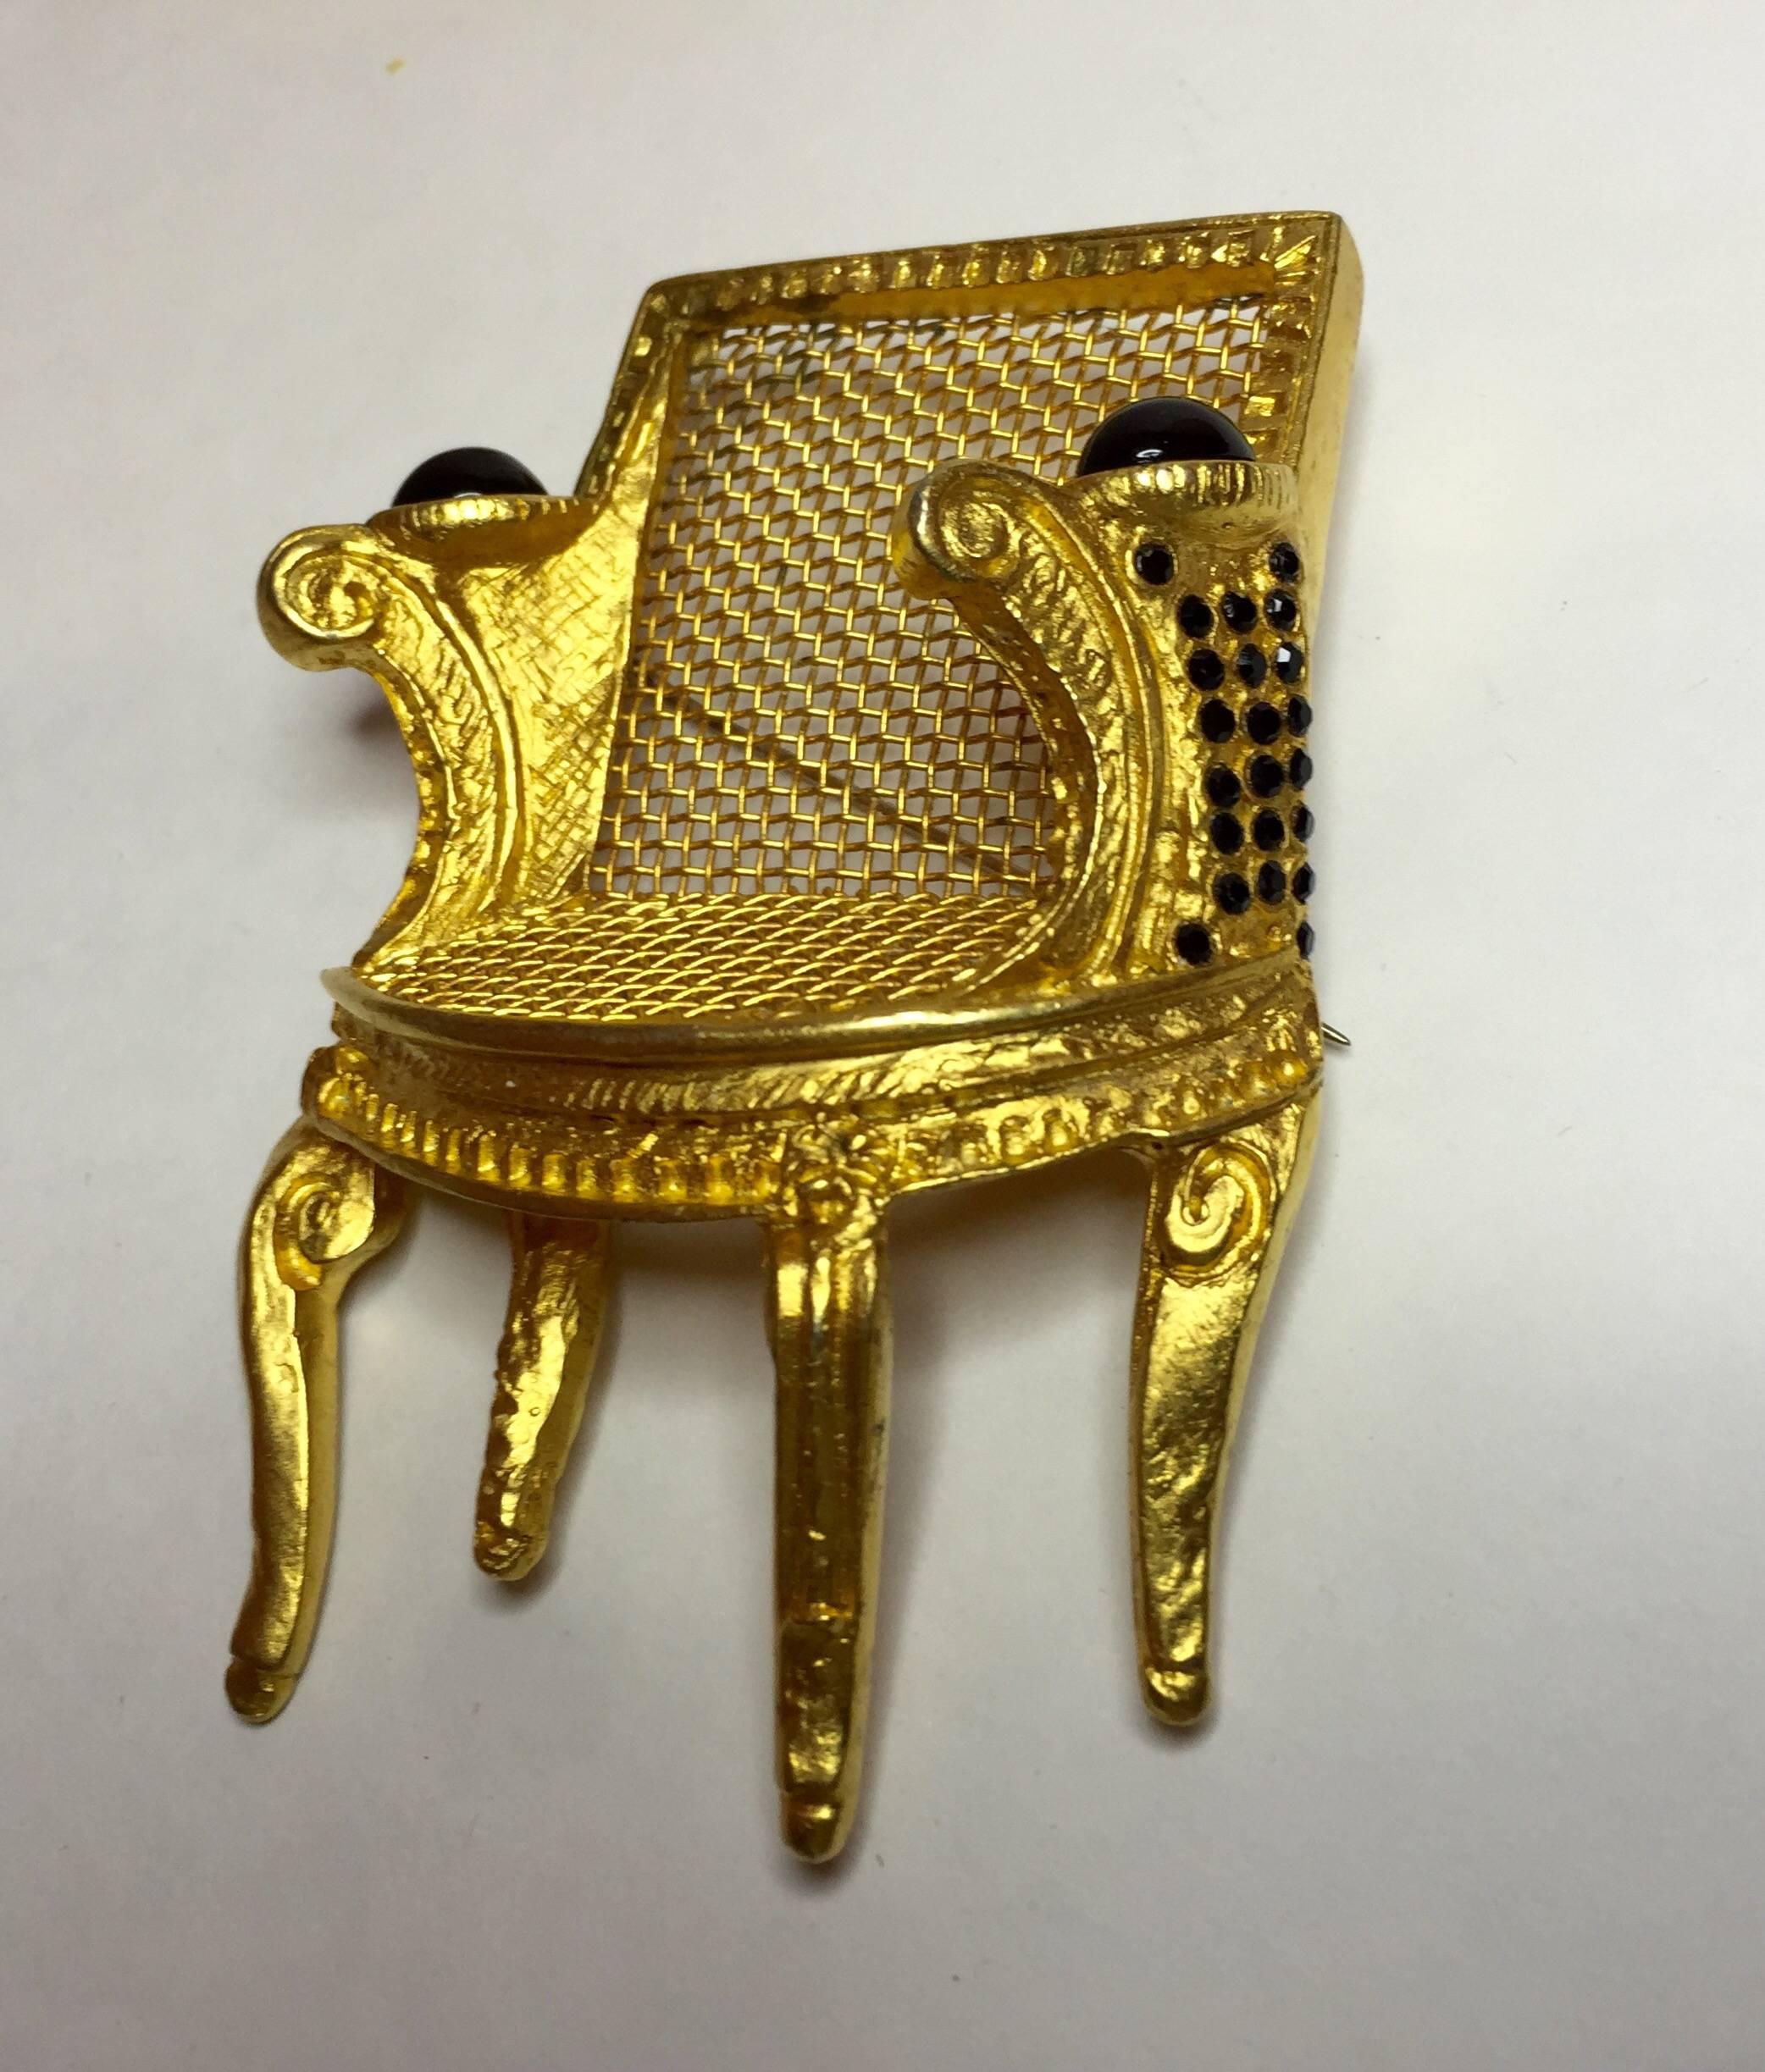 1990s KARL LAGERFELD Armchair Bergere Matte Goldtone Brooch In Excellent Condition For Sale In Palm Springs, CA